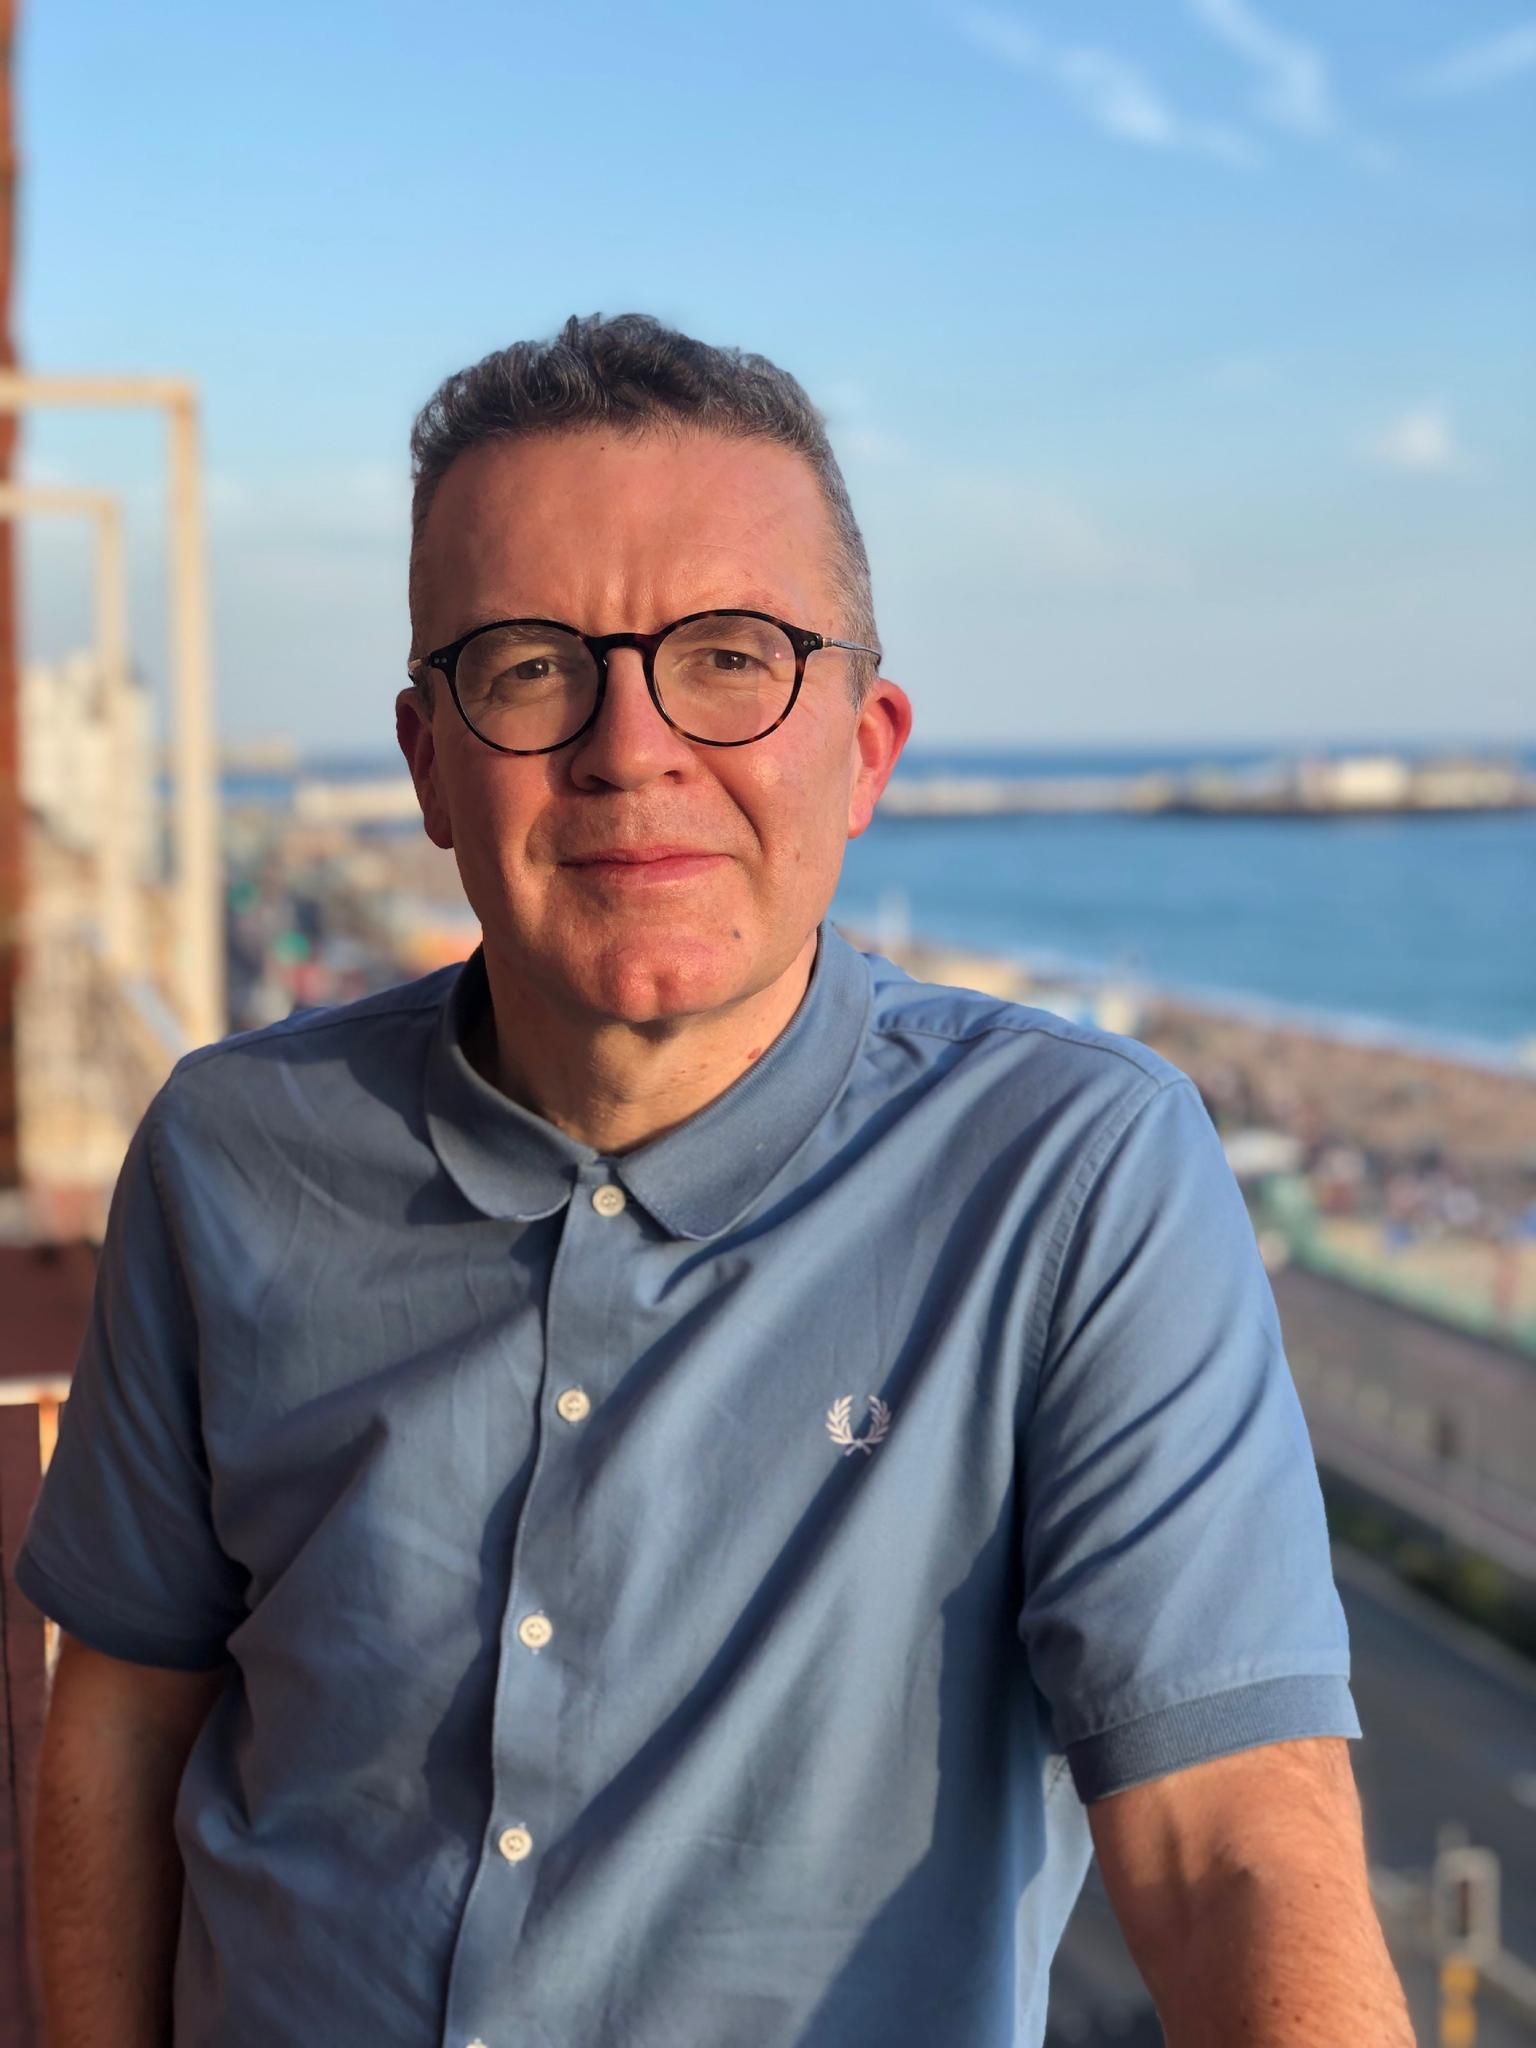 Former Labour Party Deputy Leader, Tom Watson confirmed as ICE VOX keynote